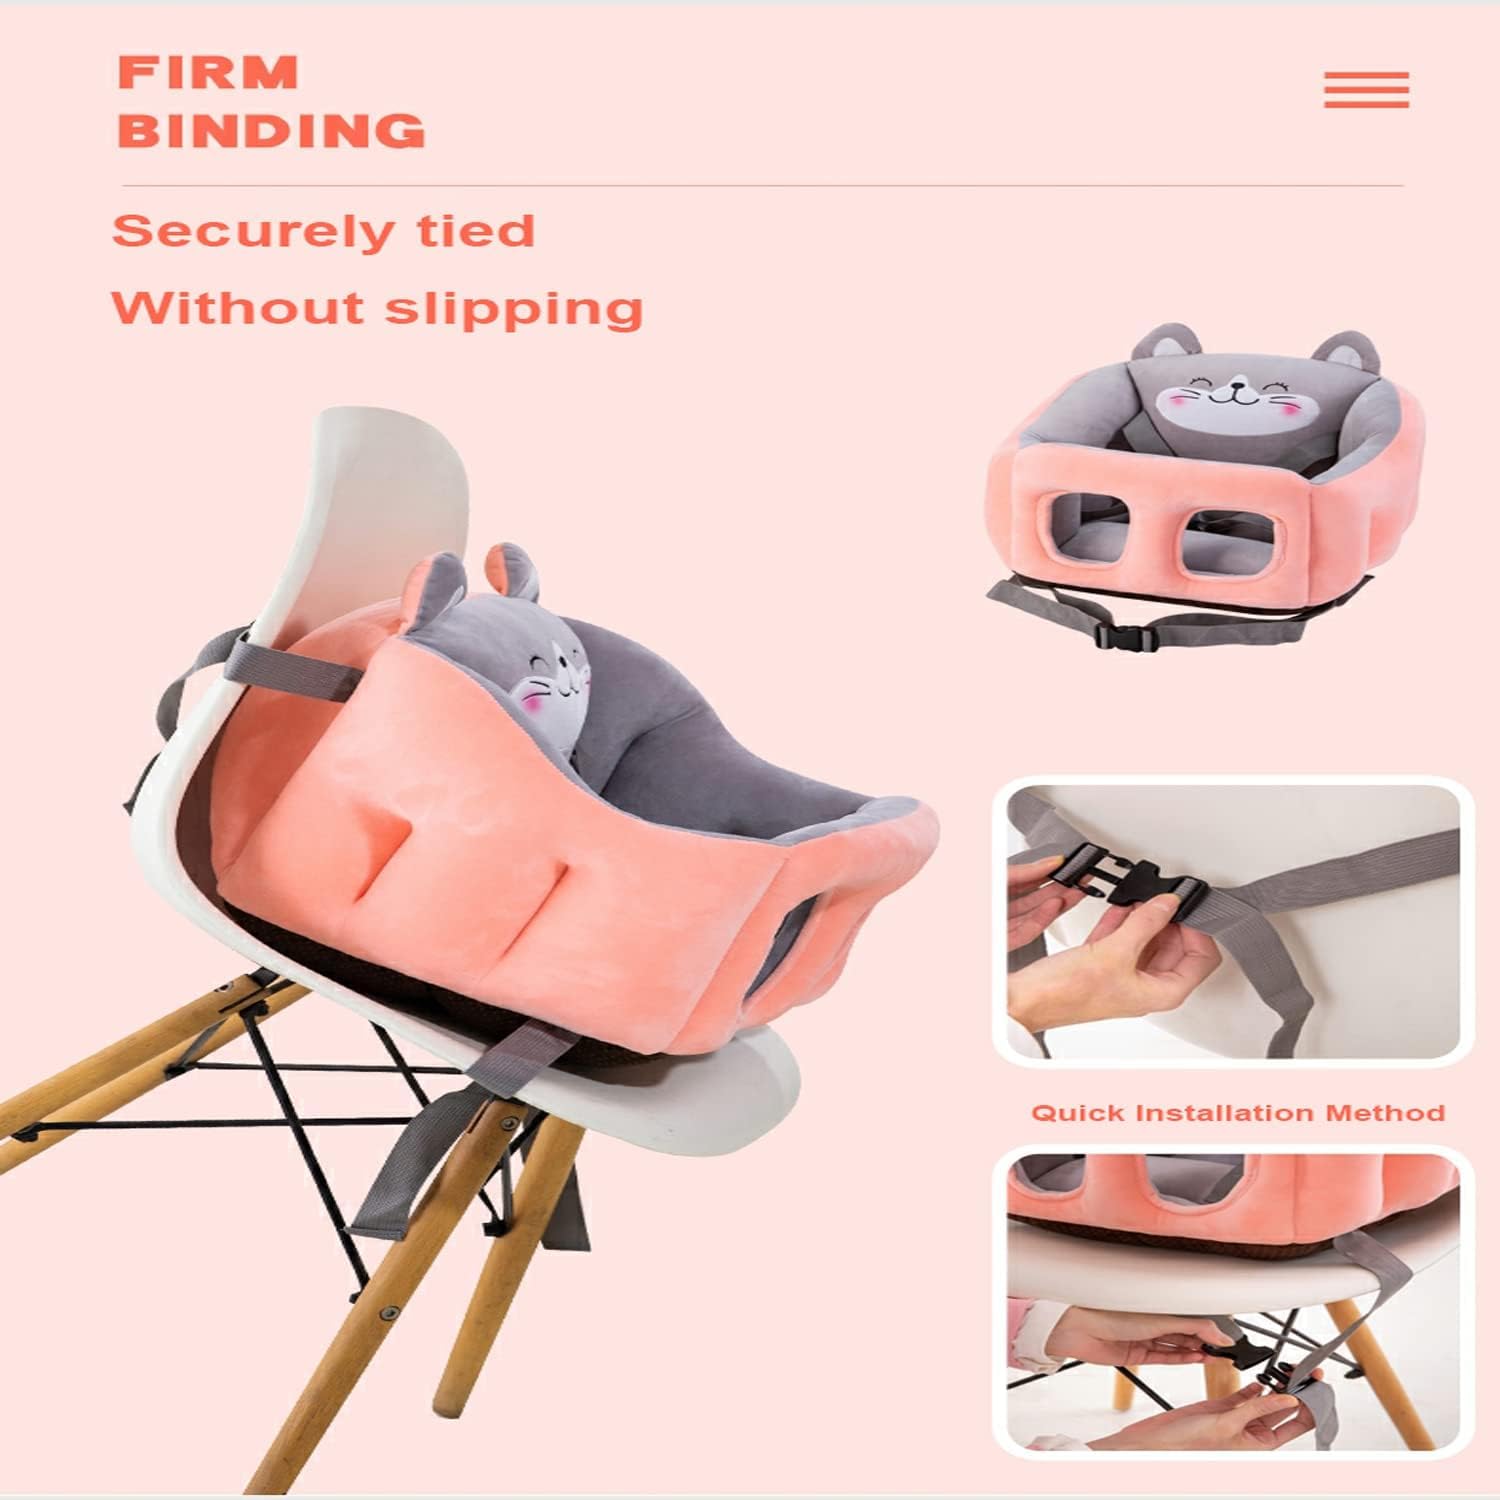 Multifunctional Lightweight Portable Baby Dining Chair with Soft Breathable Foam Layer, Back Support Seat - Grey/Pink